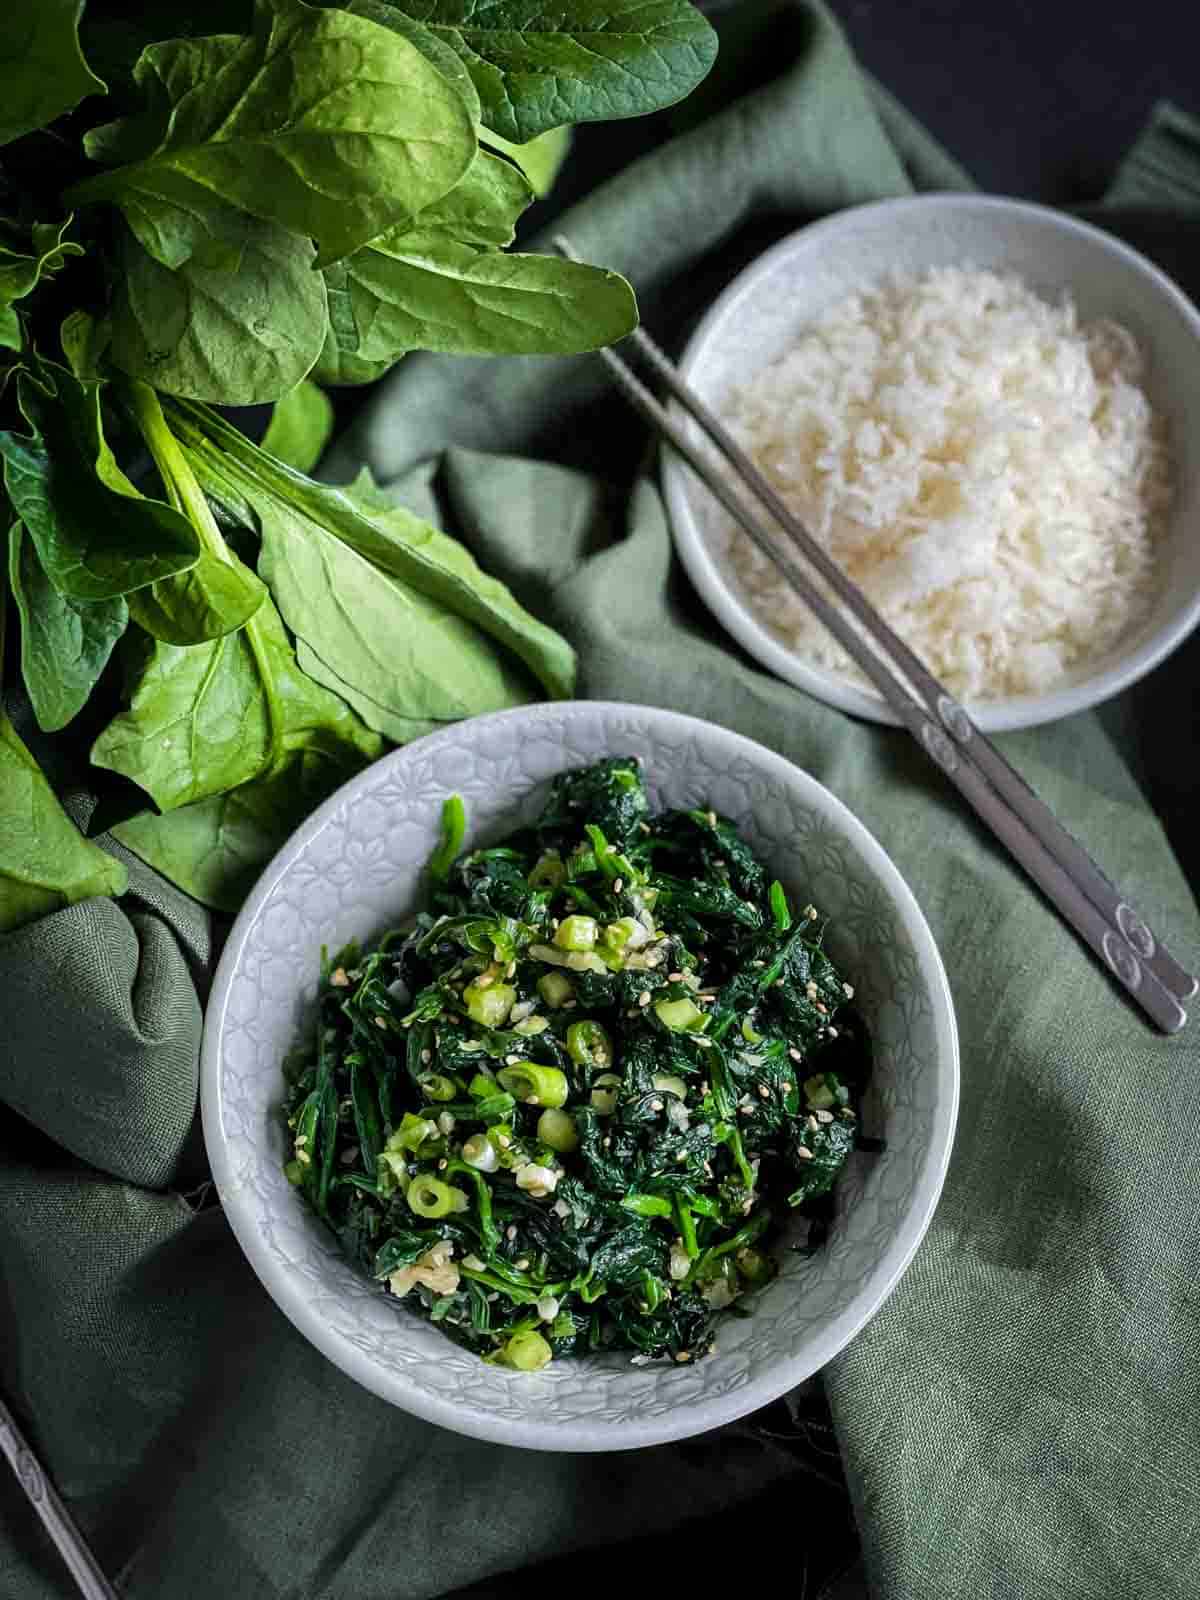 Korean Spinach Side Dish - Sigeumchi Namul served with rice on green tablecloth